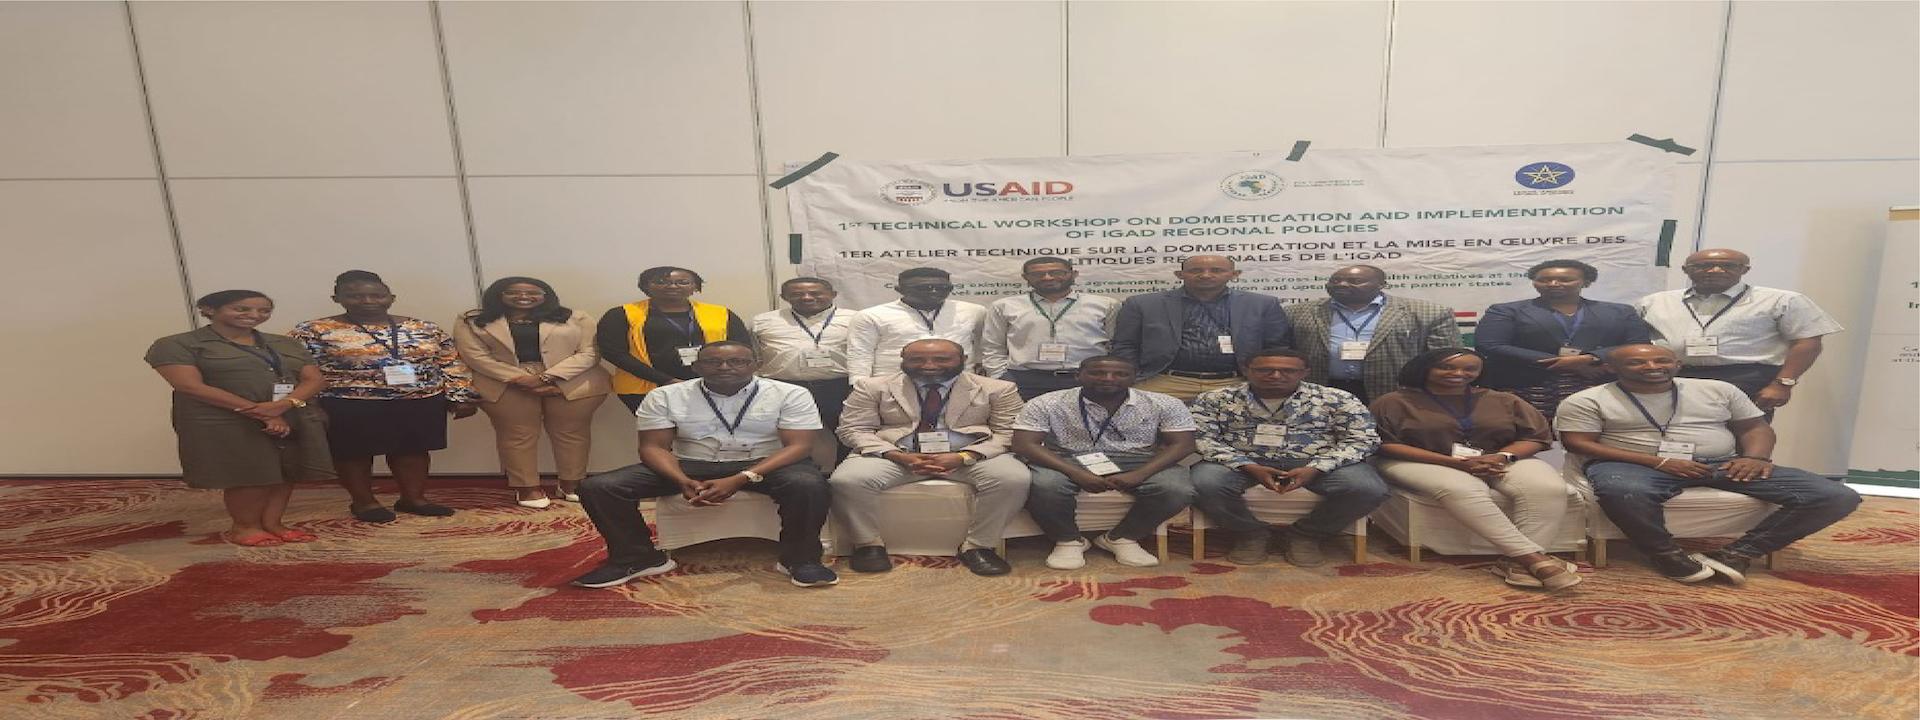 IGAD Commences the First Technical Workshop on Domestication and Implementation of Regional Health Policies